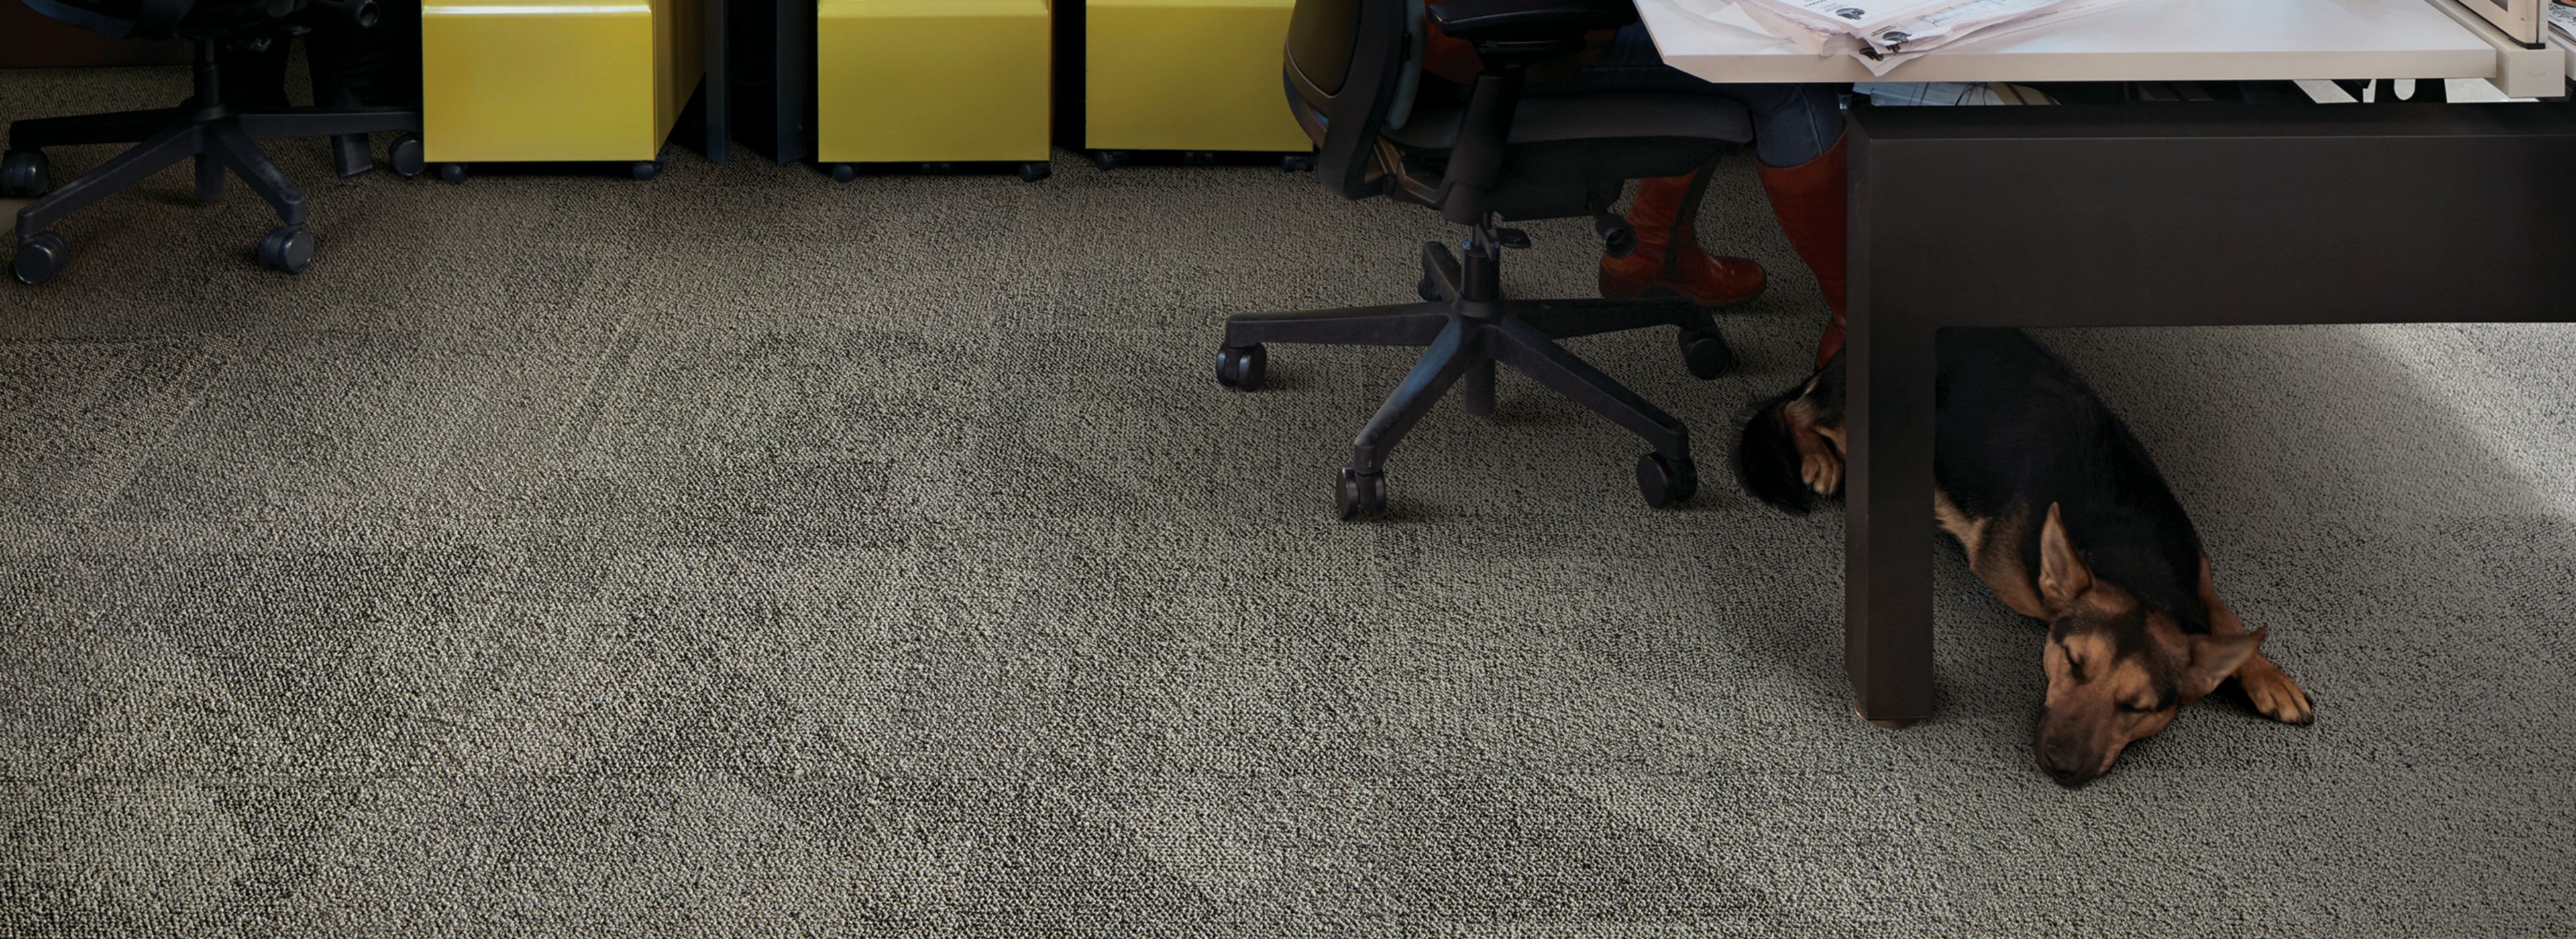 Interface Paver carpet tile and HN850 plank carpet tile in open office area with multiple people working at desk numéro d’image 1